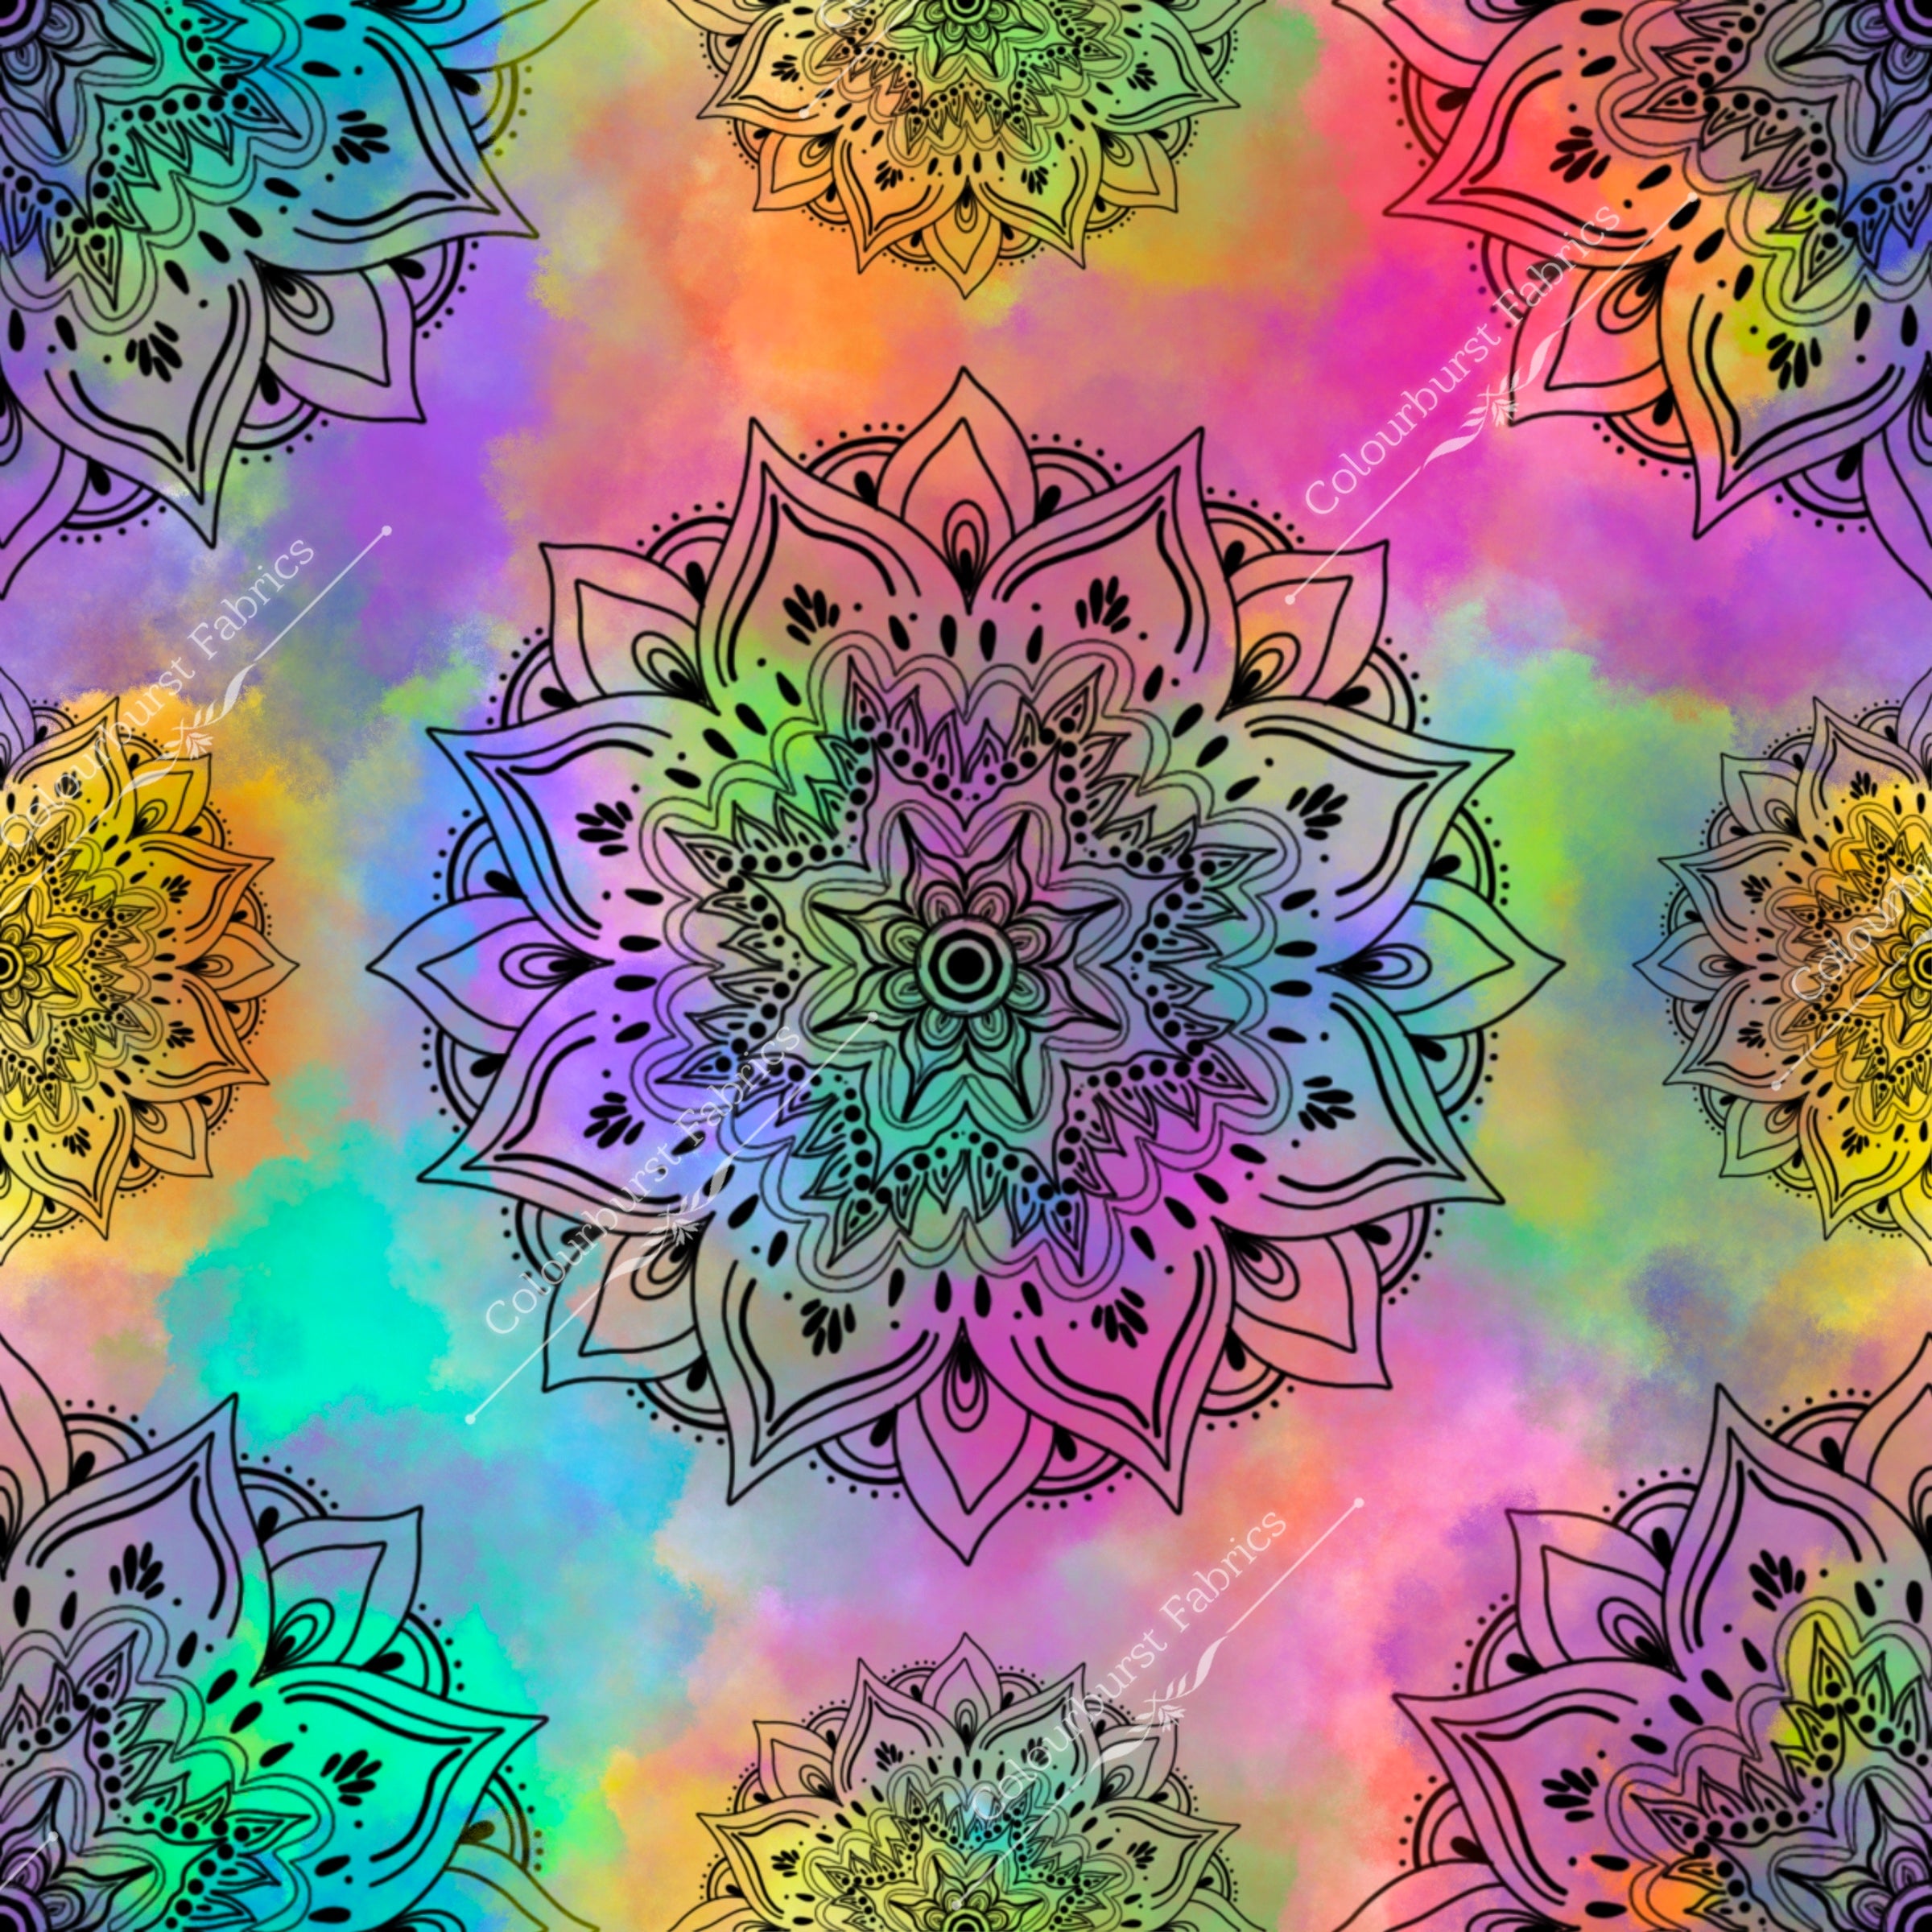 Rainbow ombre mandala exclusive design for custom fabric printing onto our 22 bases